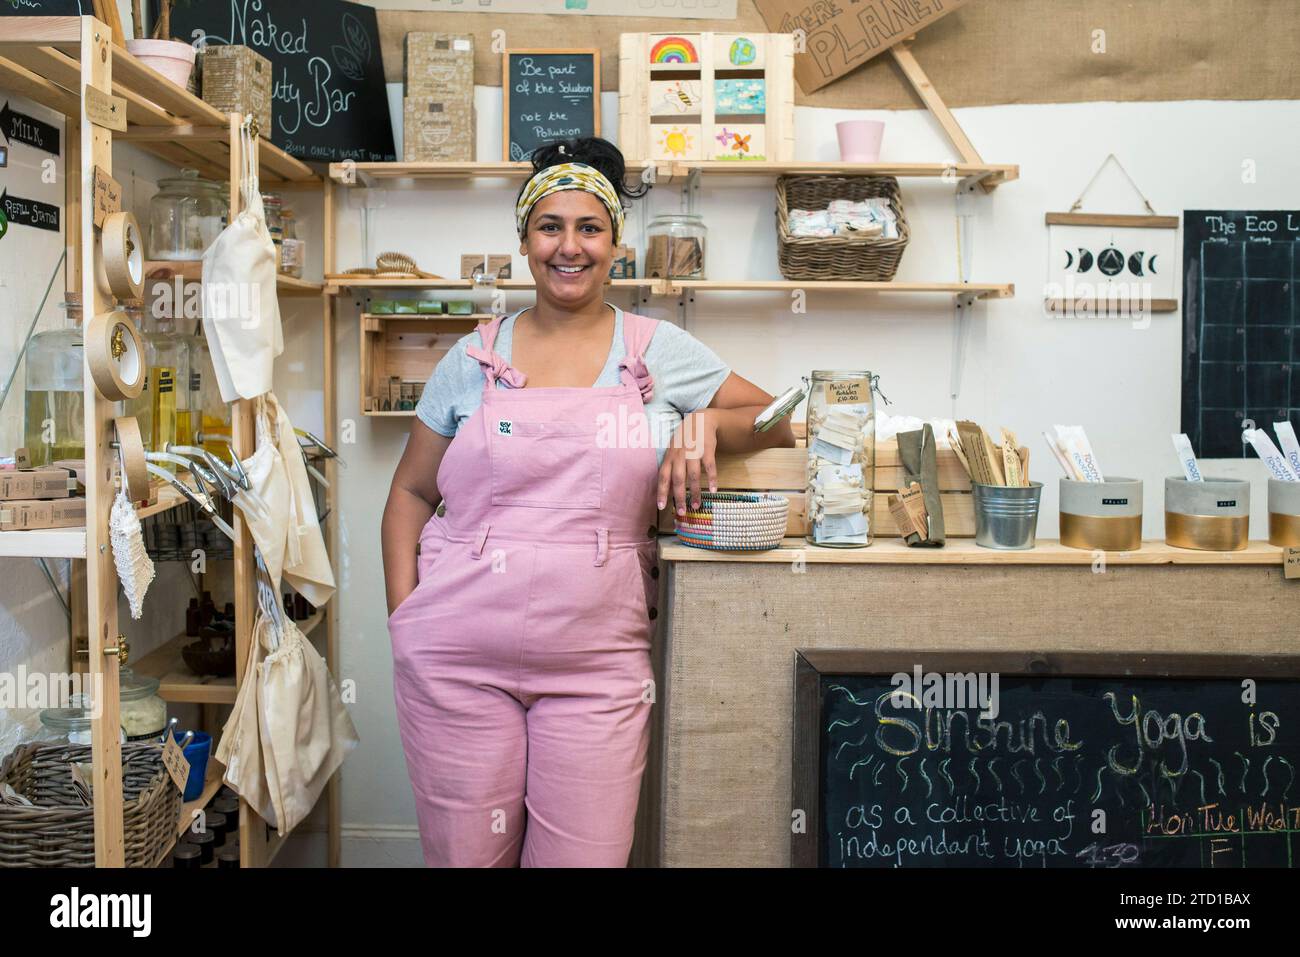 A young woman and business owner stands in her environmentally friendly natural food and drink shop. Stock Photo